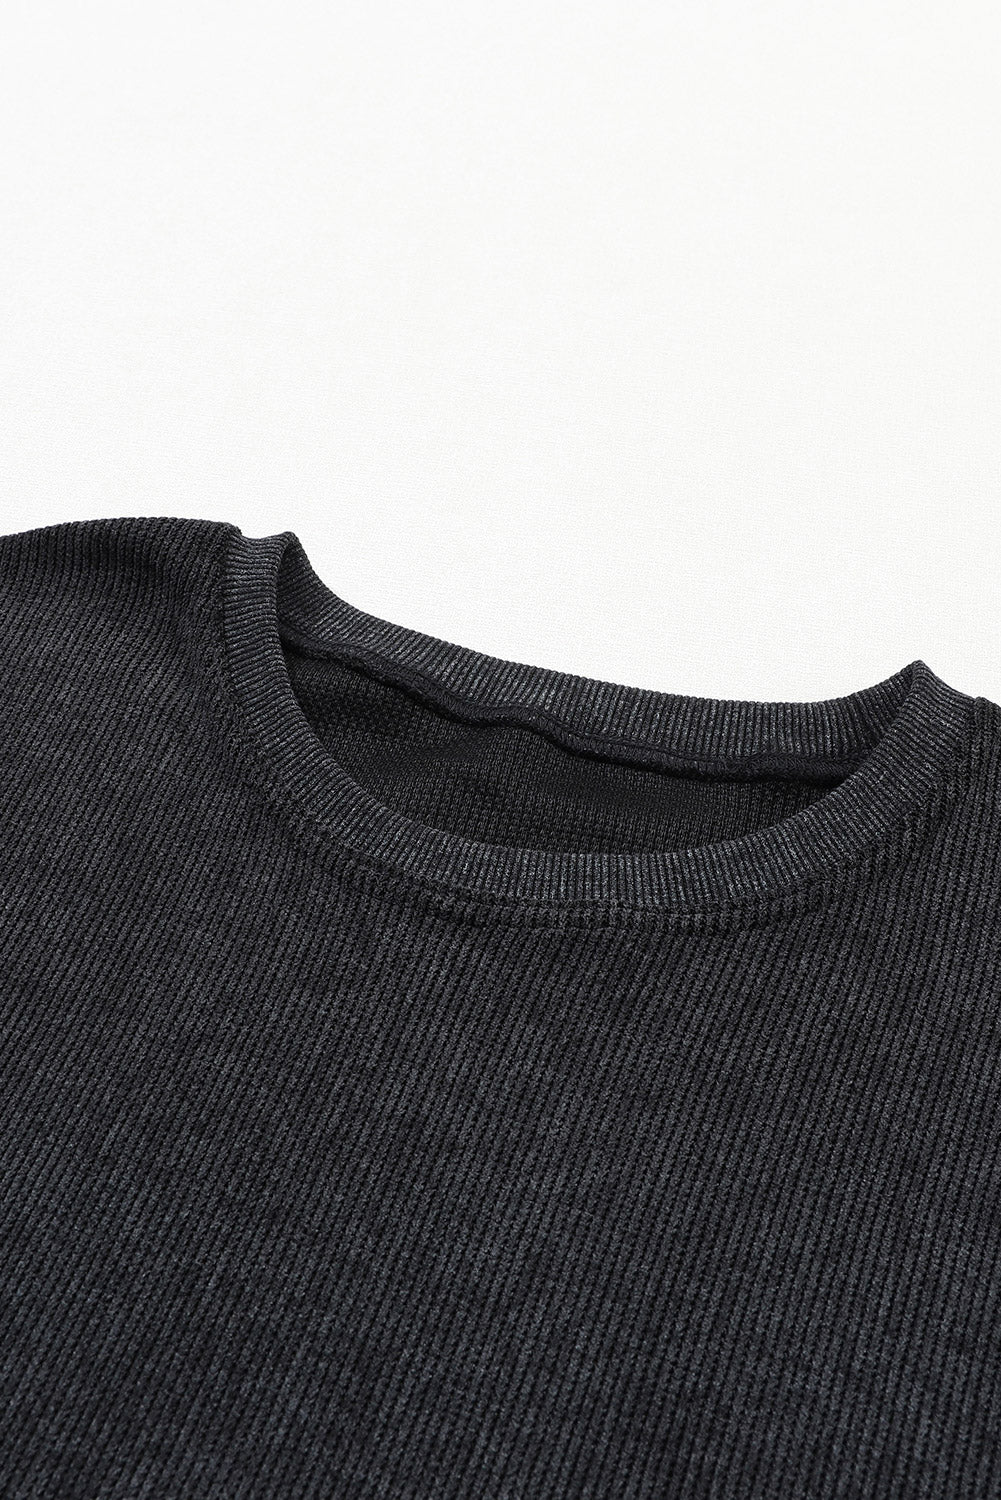 Blue Plain Solid Ribbed Knit Round Neck Pullover Sweatshirt